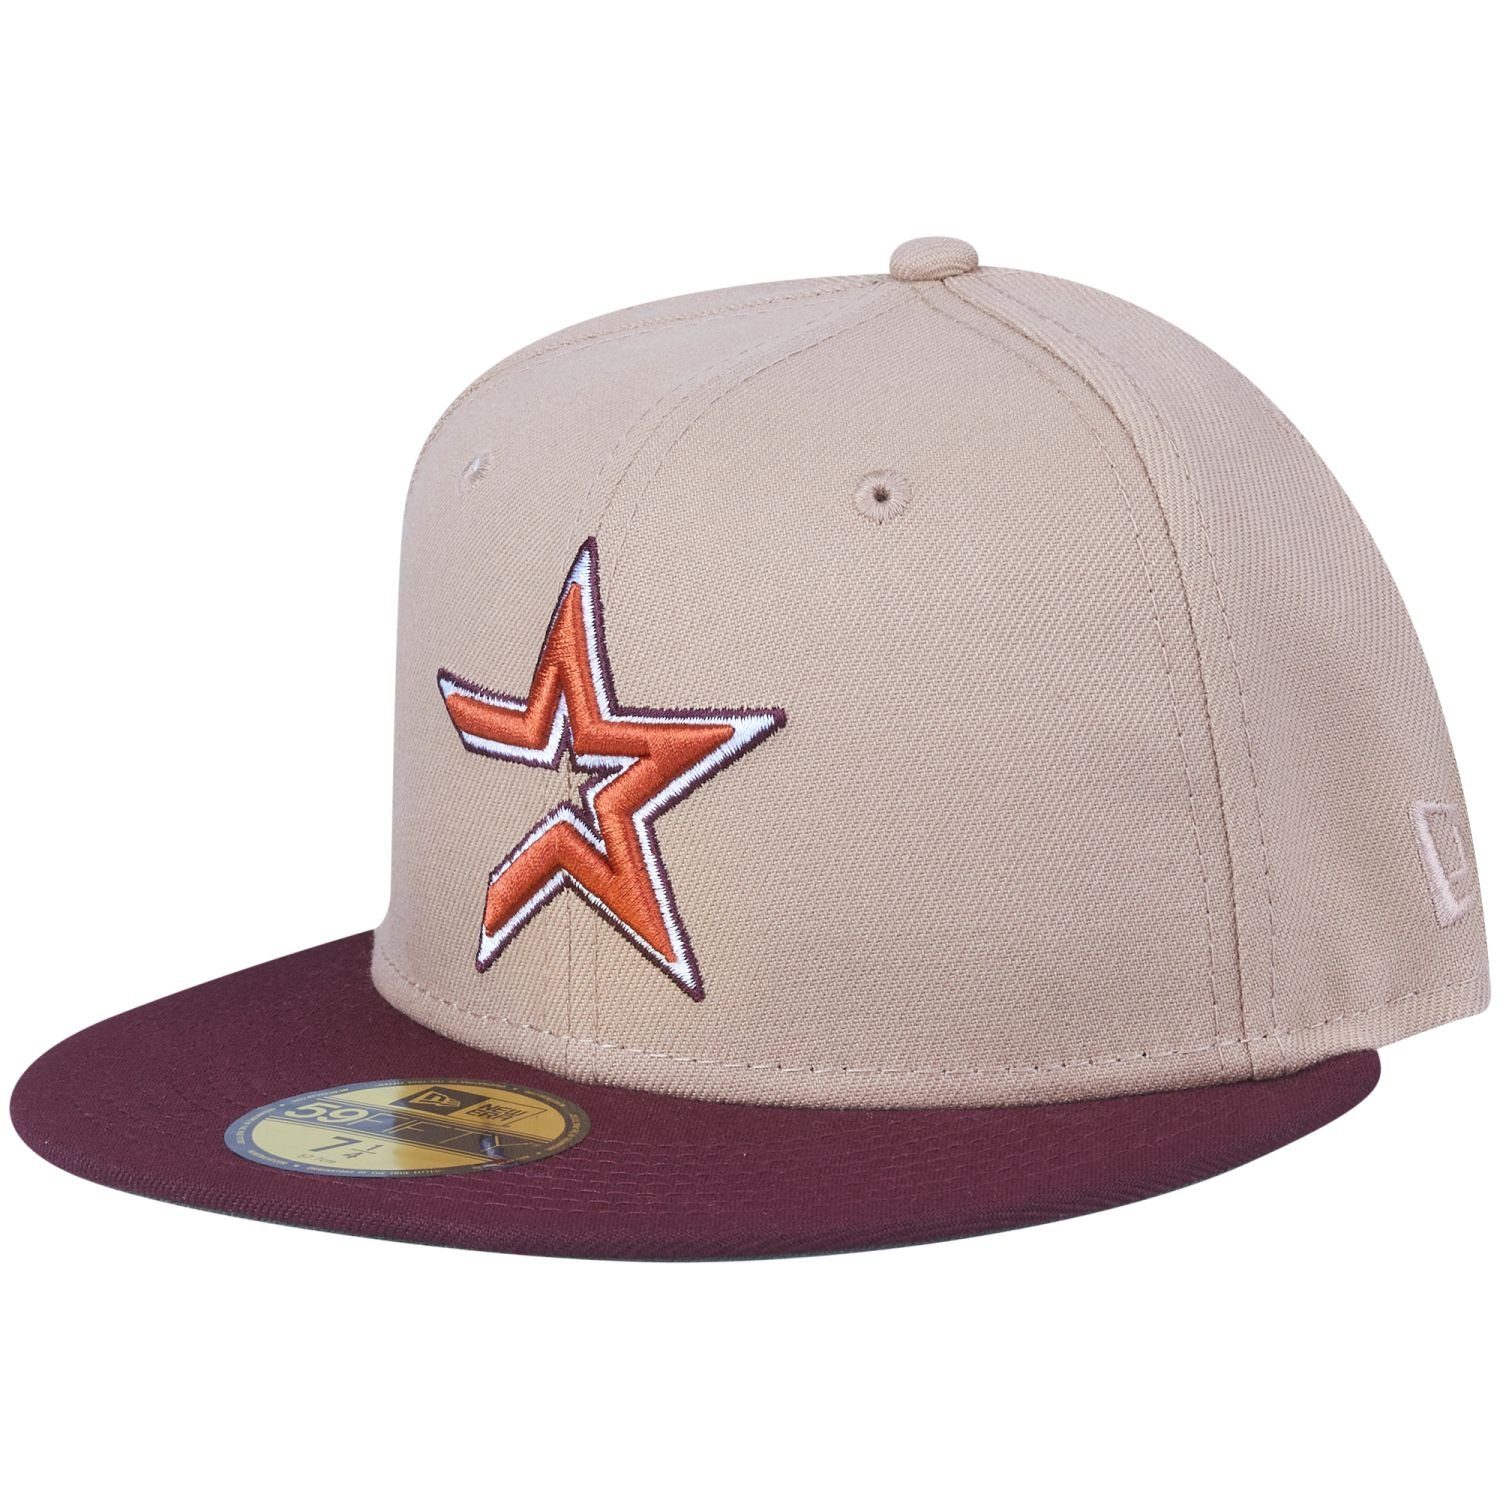 Cap Era 59Fifty New Houston COOPERSTOWN Fitted Astros